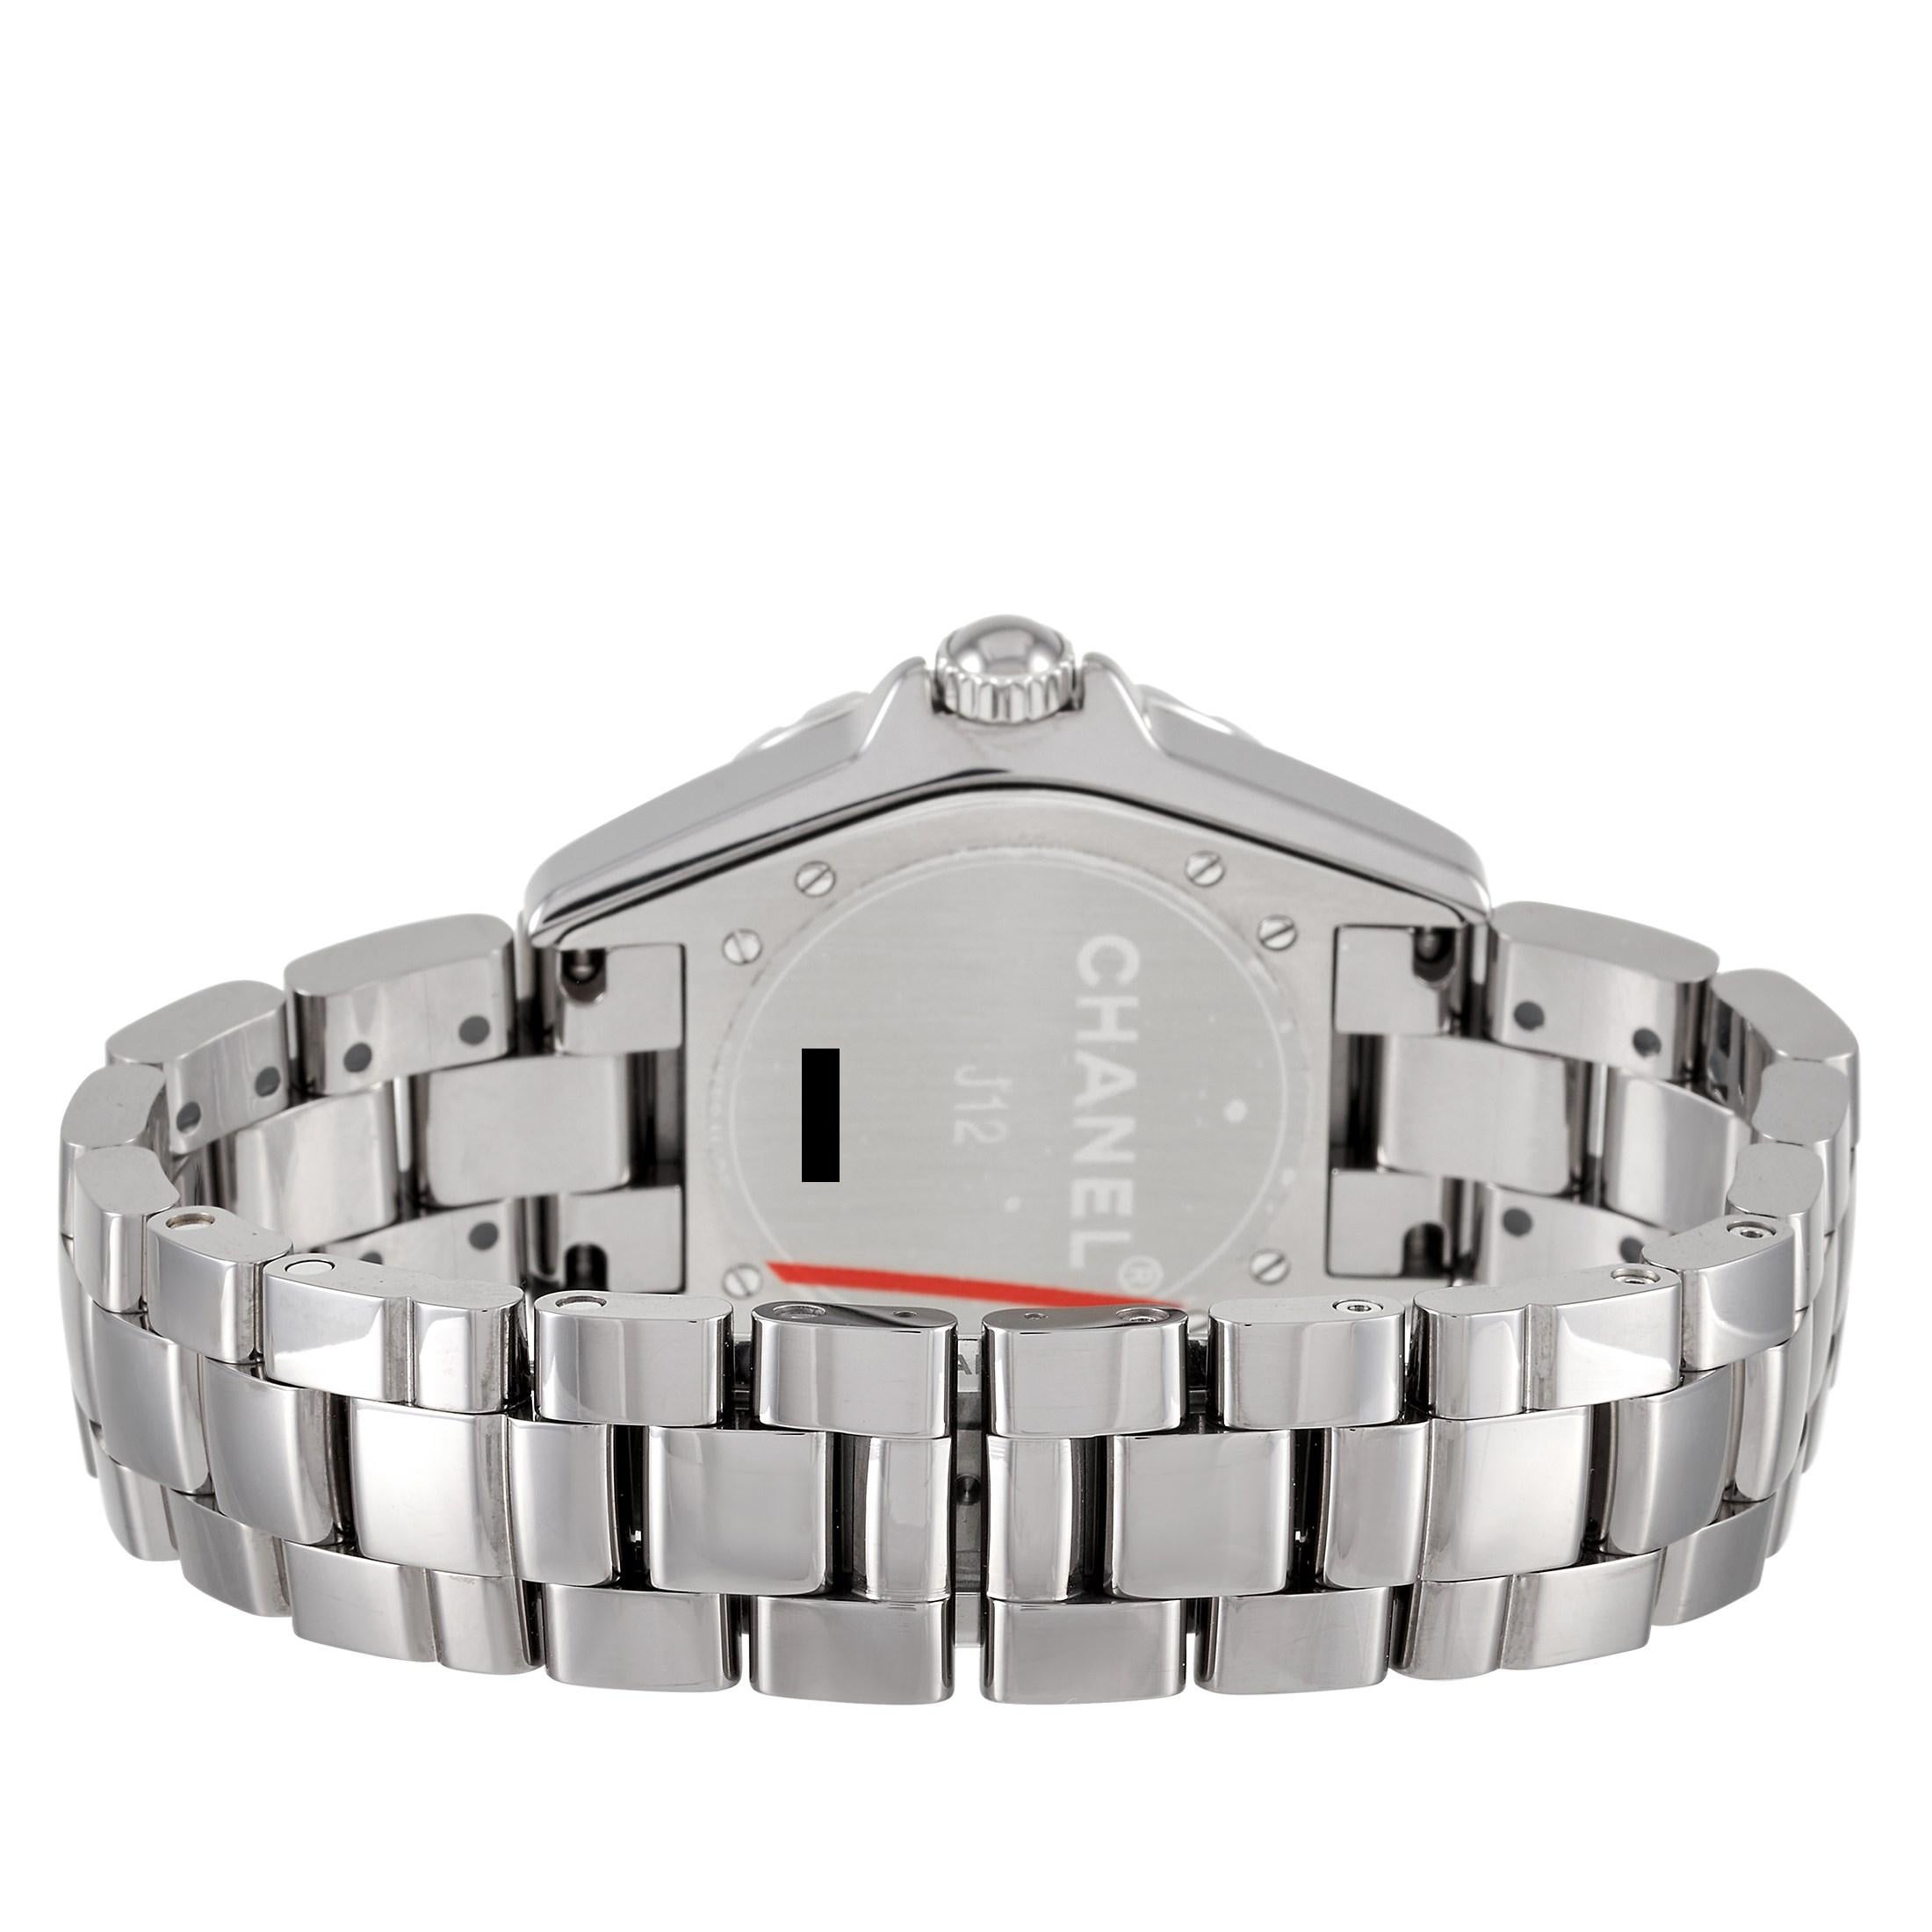 Women's or Men's Chanel J12 Chromatic Automatic Watch H2566